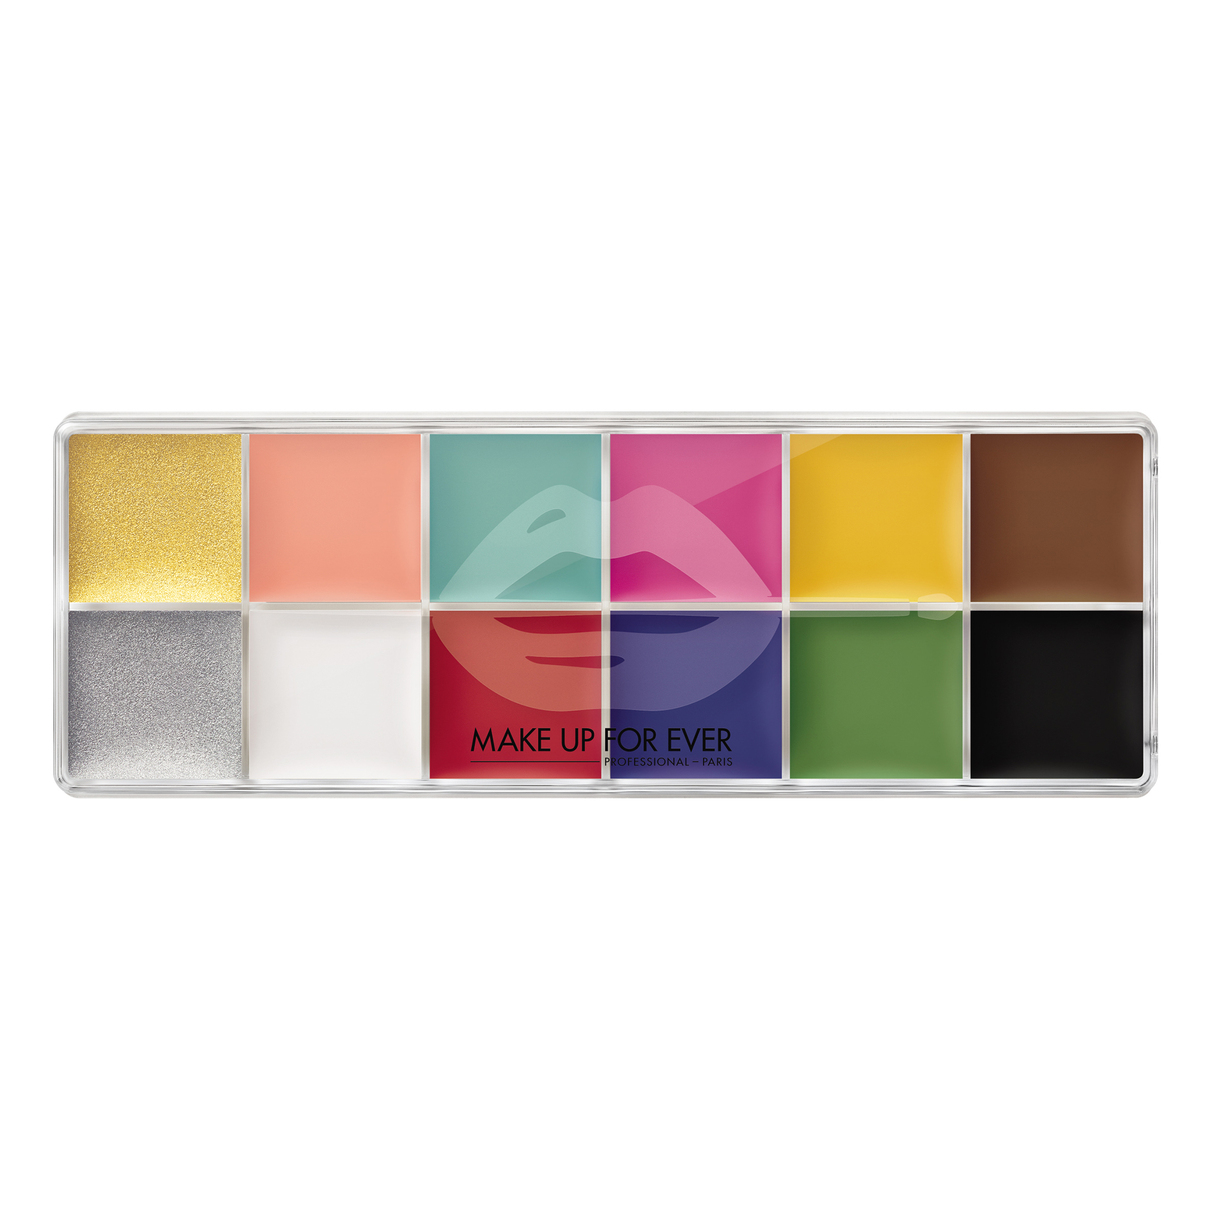 MAKE UP FOR EVER - 12 Harmony Flash Color Box